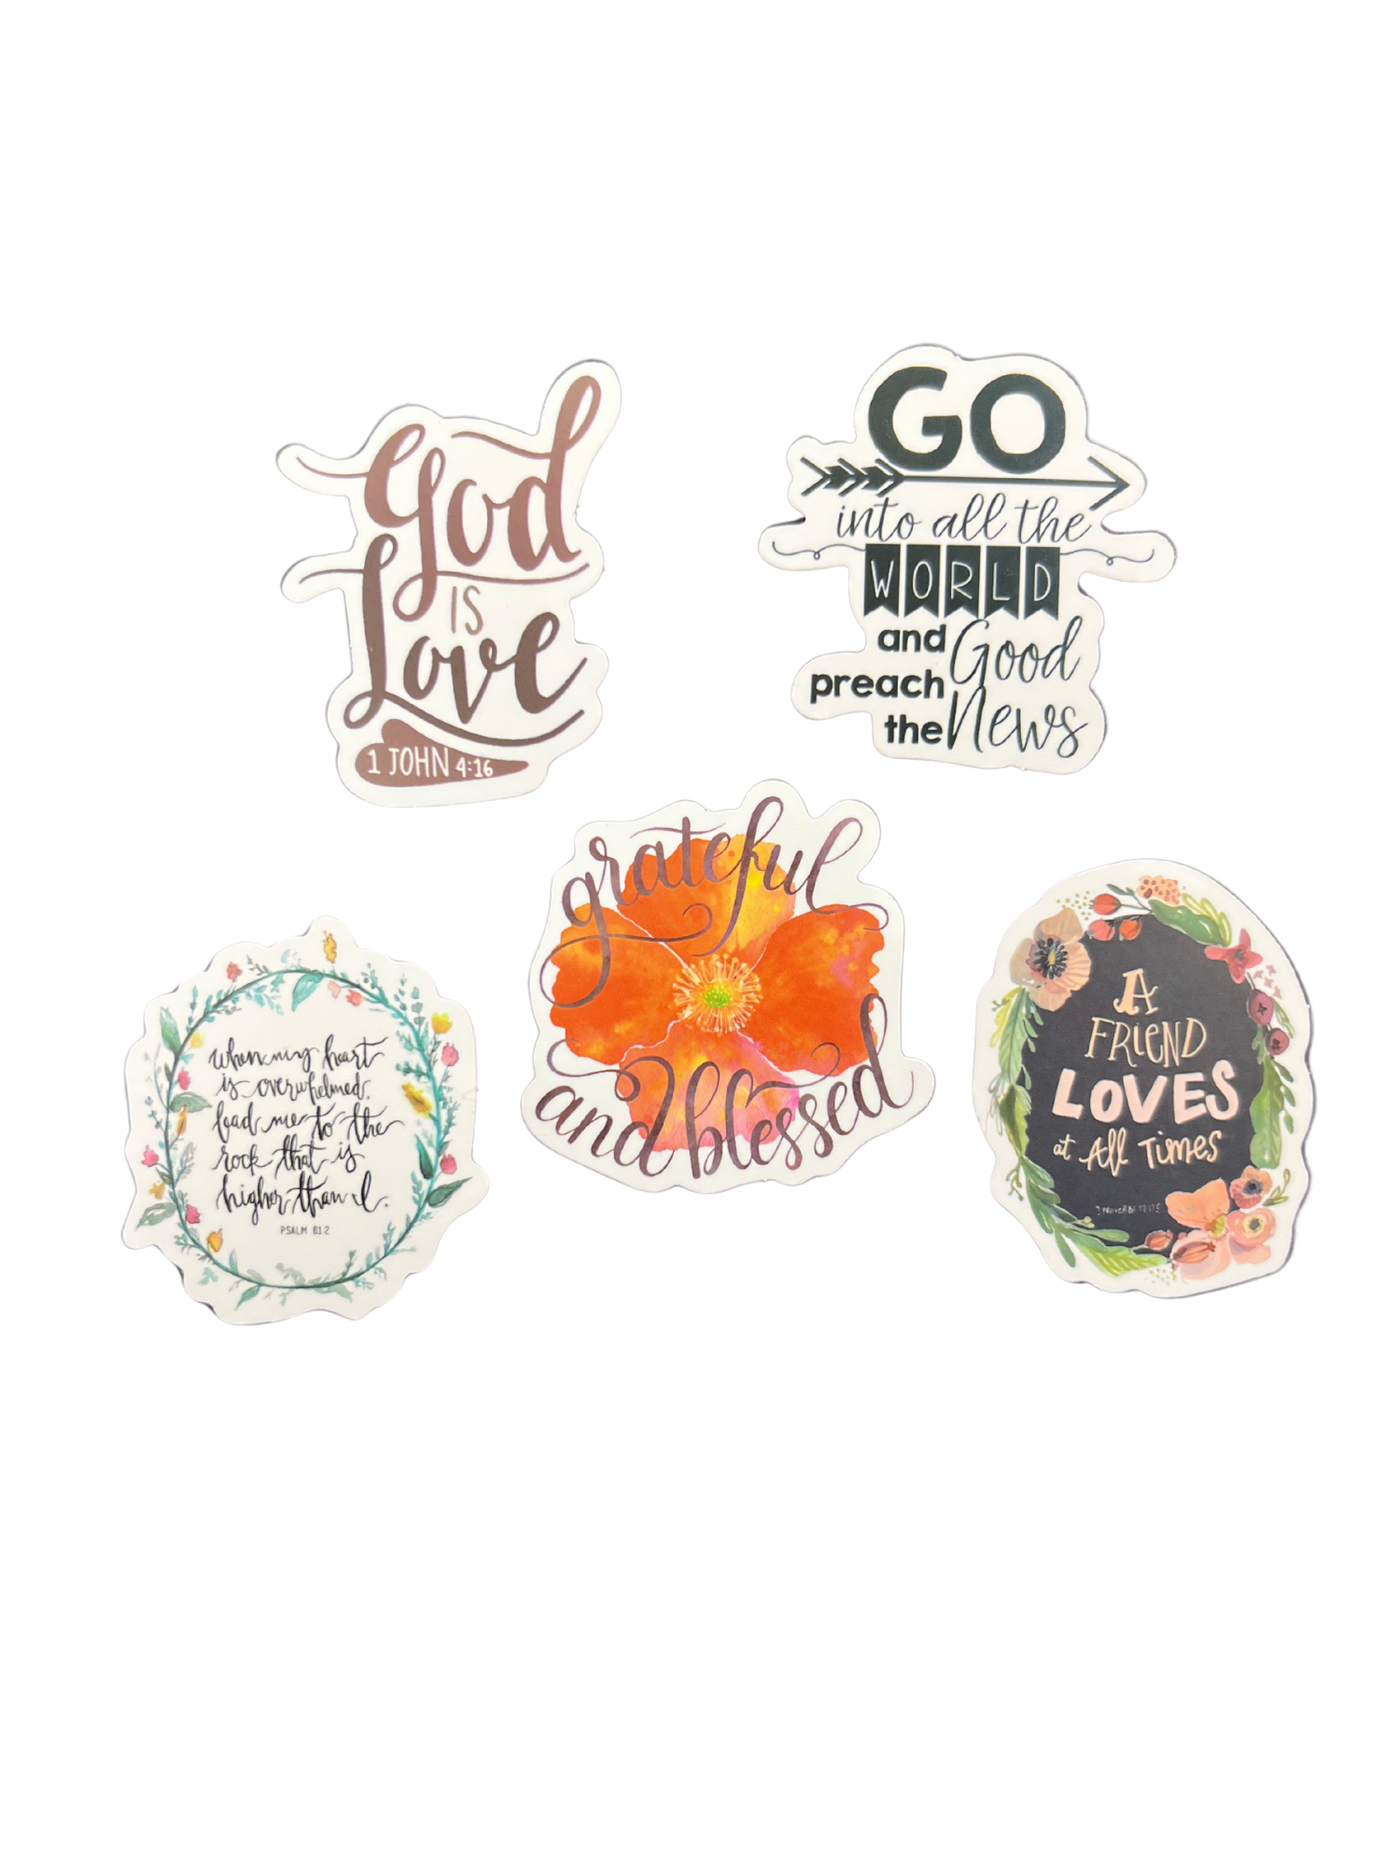 Set of 5 Christian stickers in navy/orange on white background.